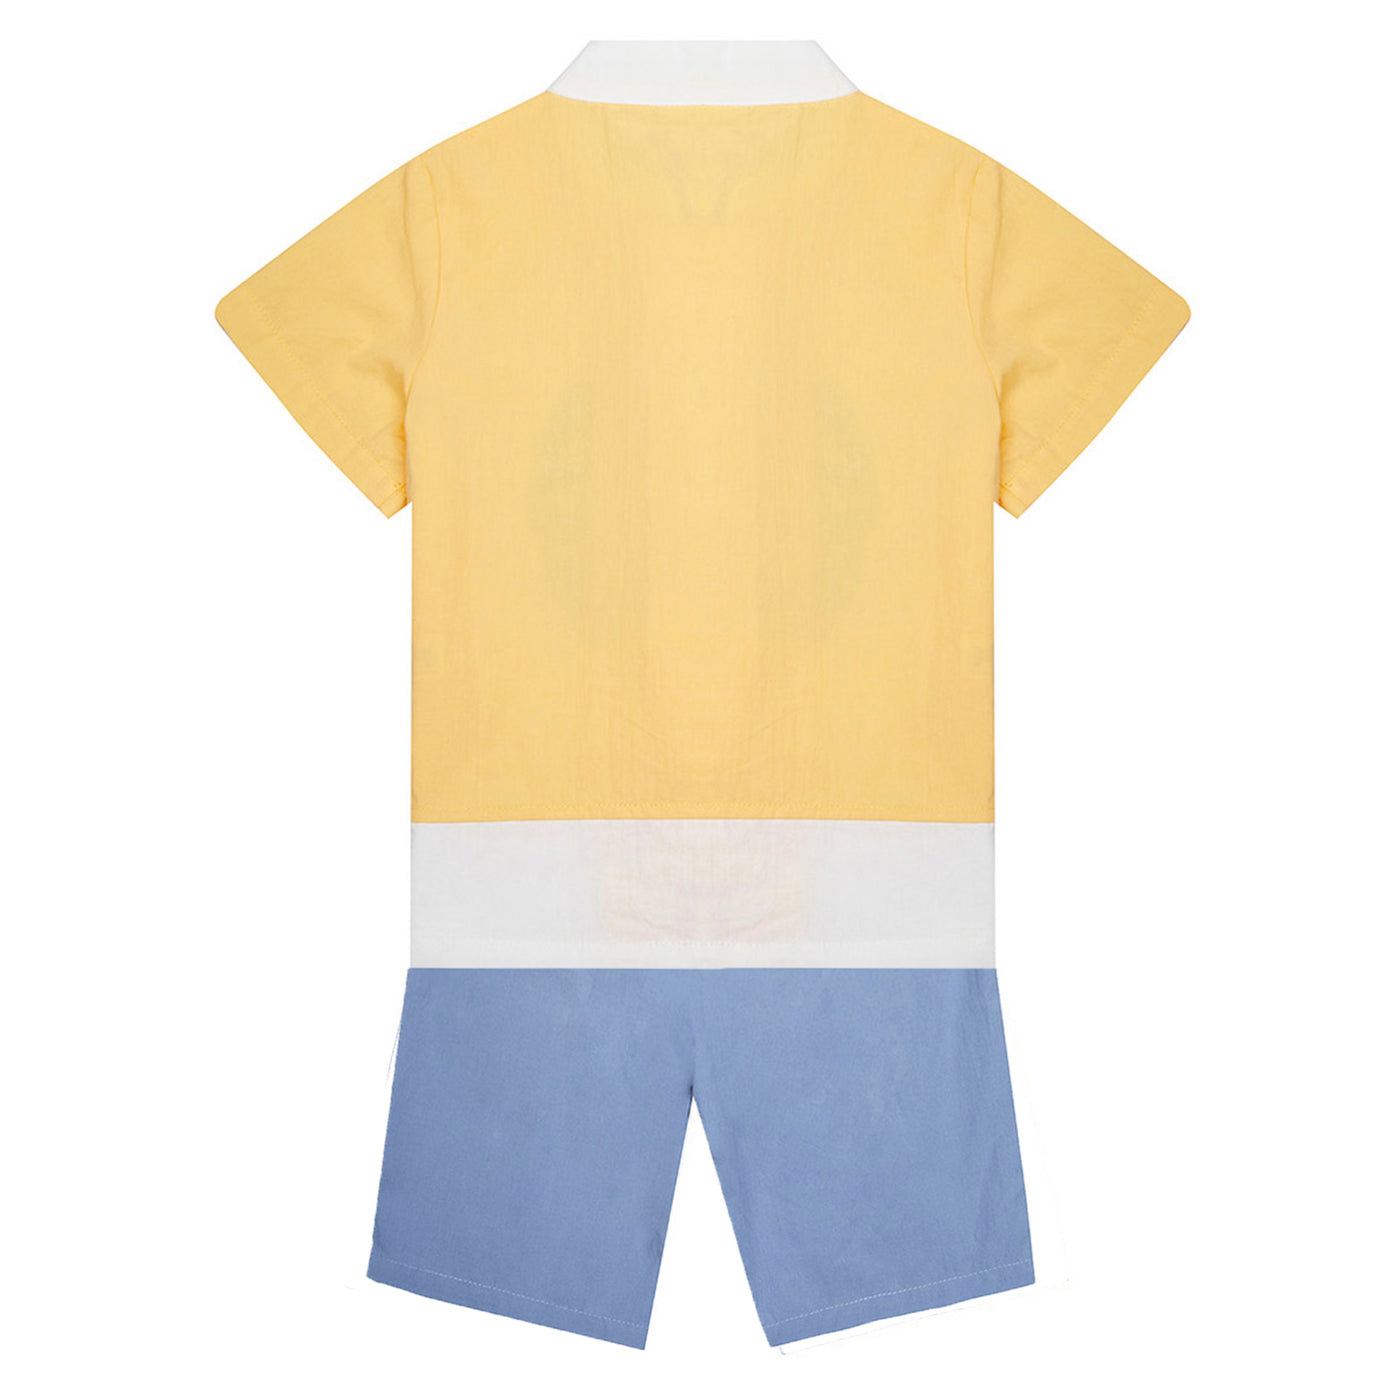 Baby Kids Boys Chinese Character Fu Cheongsam Set Yellow Top n Blue Shorts CNY Chinese New Year Outfit - Little Kooma